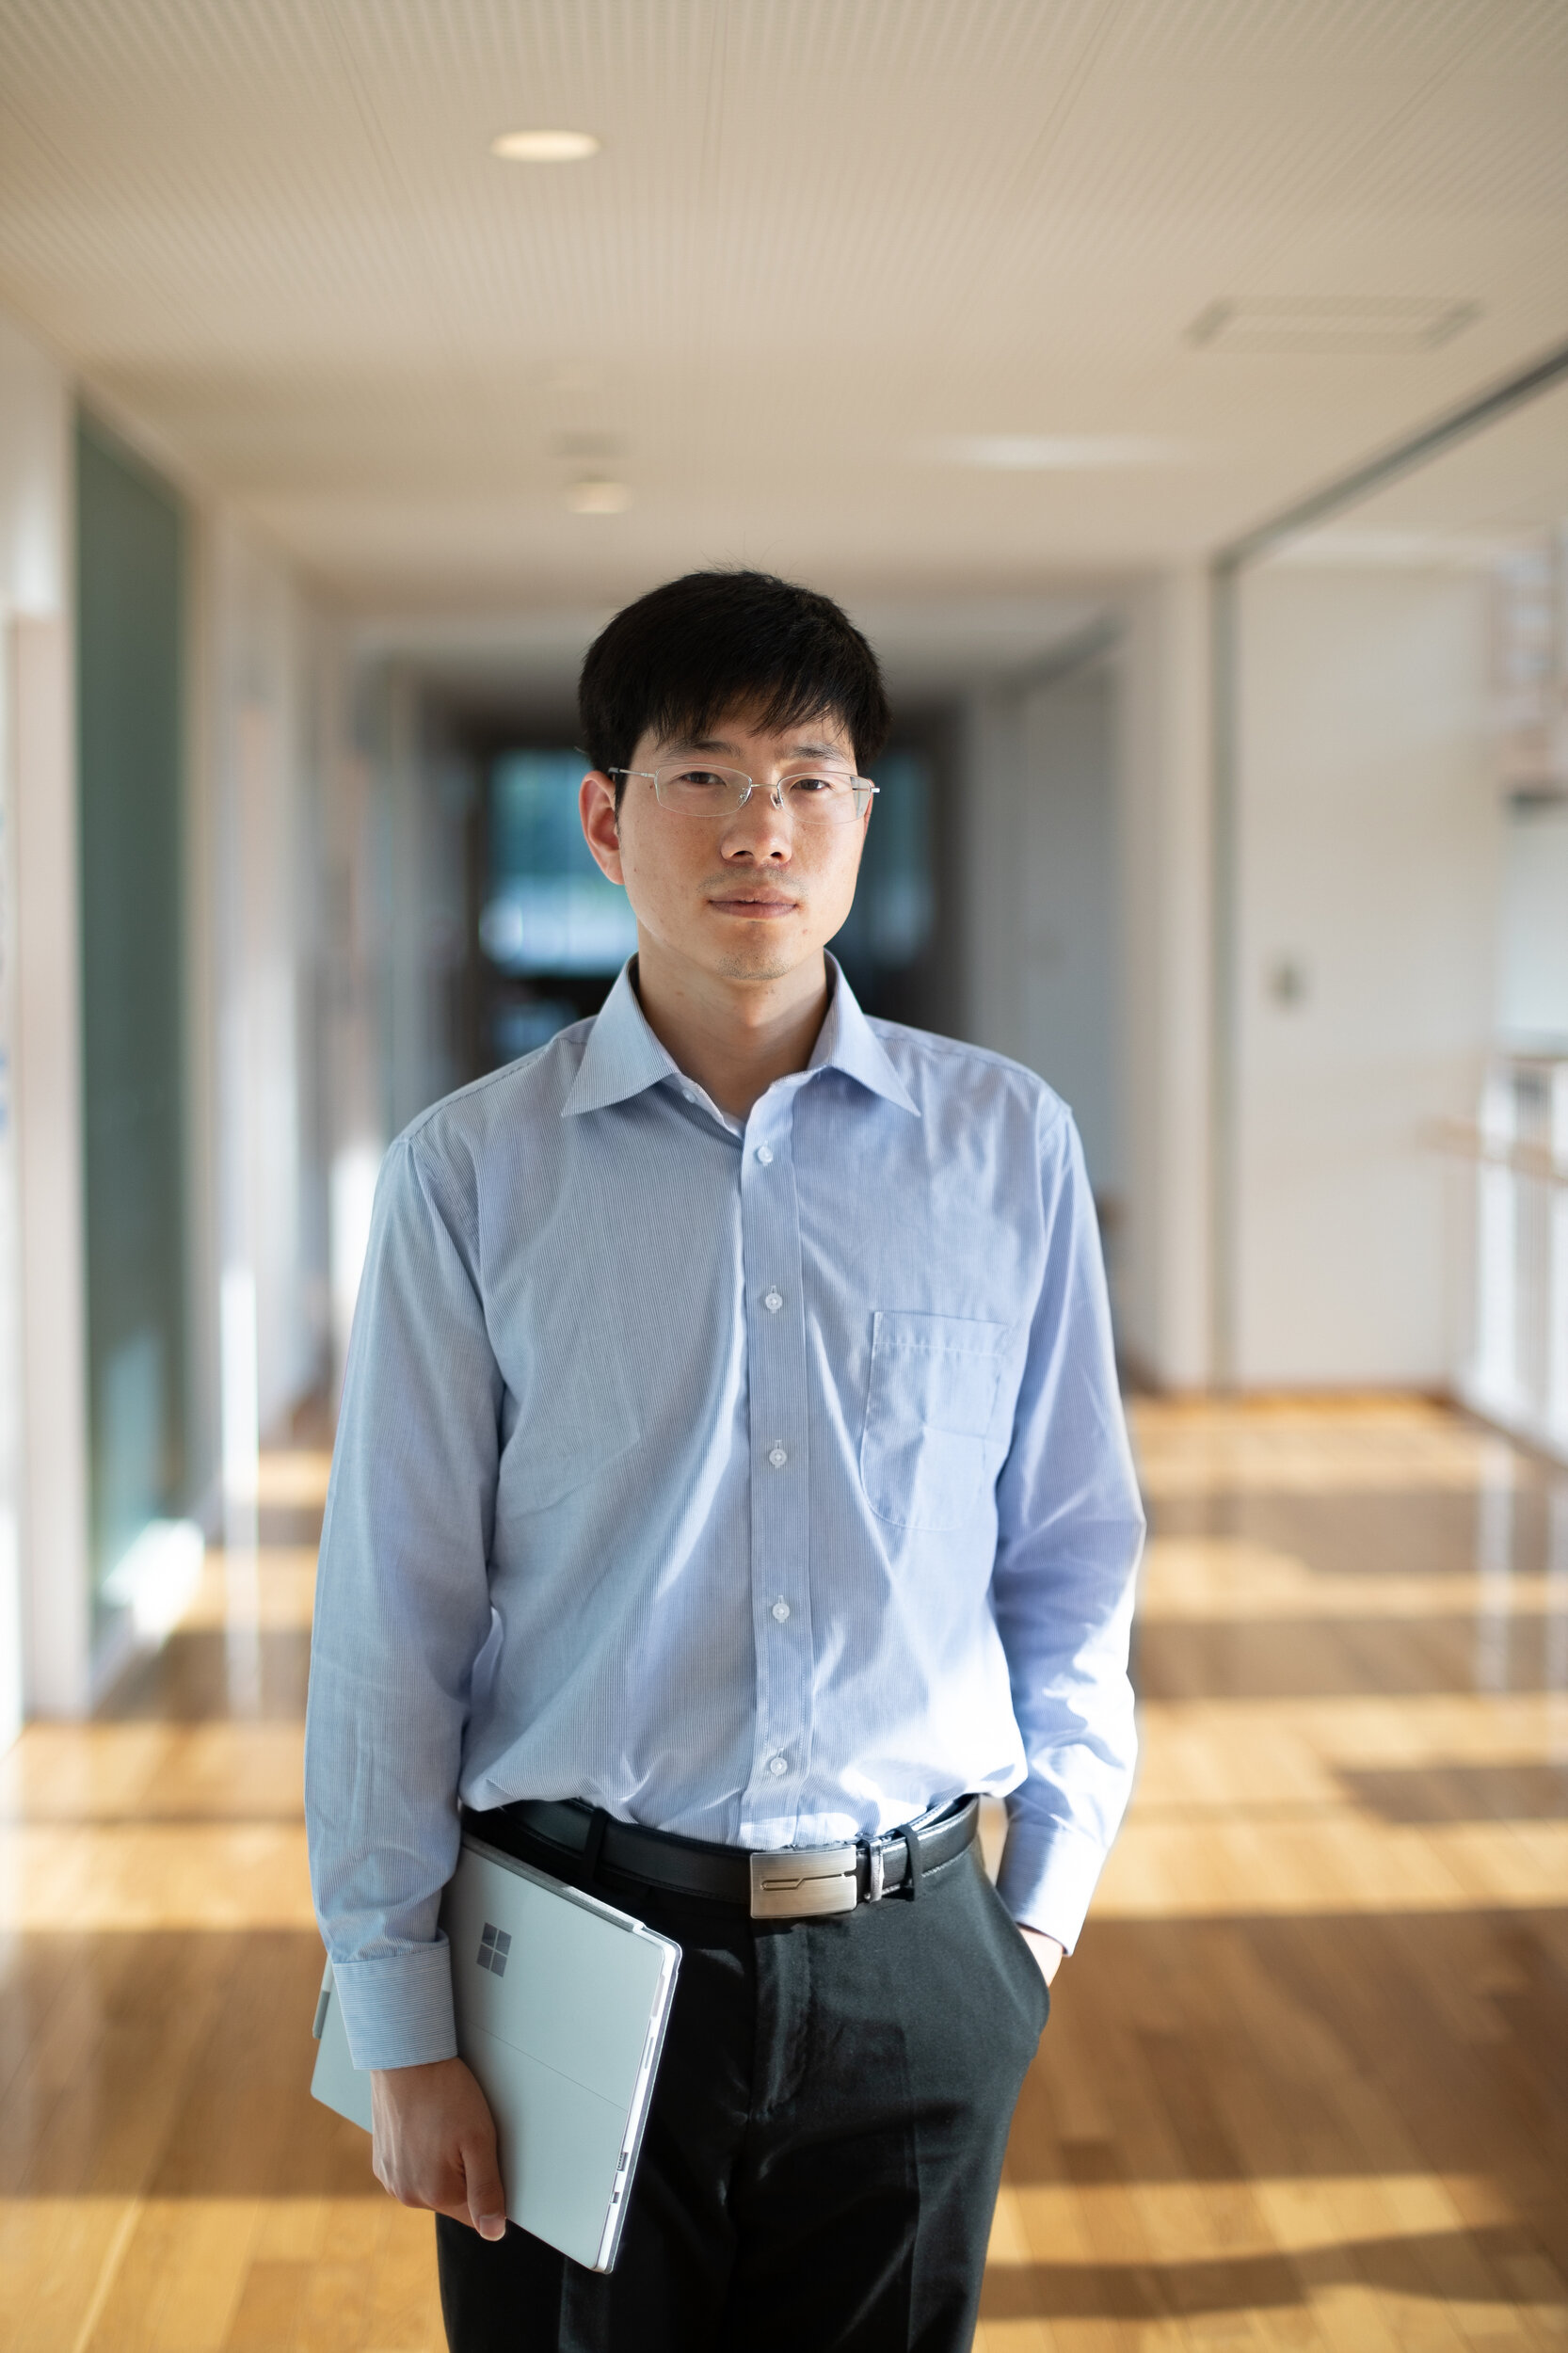  With the help of a grant from Microsoft’s AI for Earth program – a part of Microsoft’s AI for Good initiative – researchers like Bai Yanbing of Tohoku University are attempting to harness the power of artificial intelligence solutions to improve map